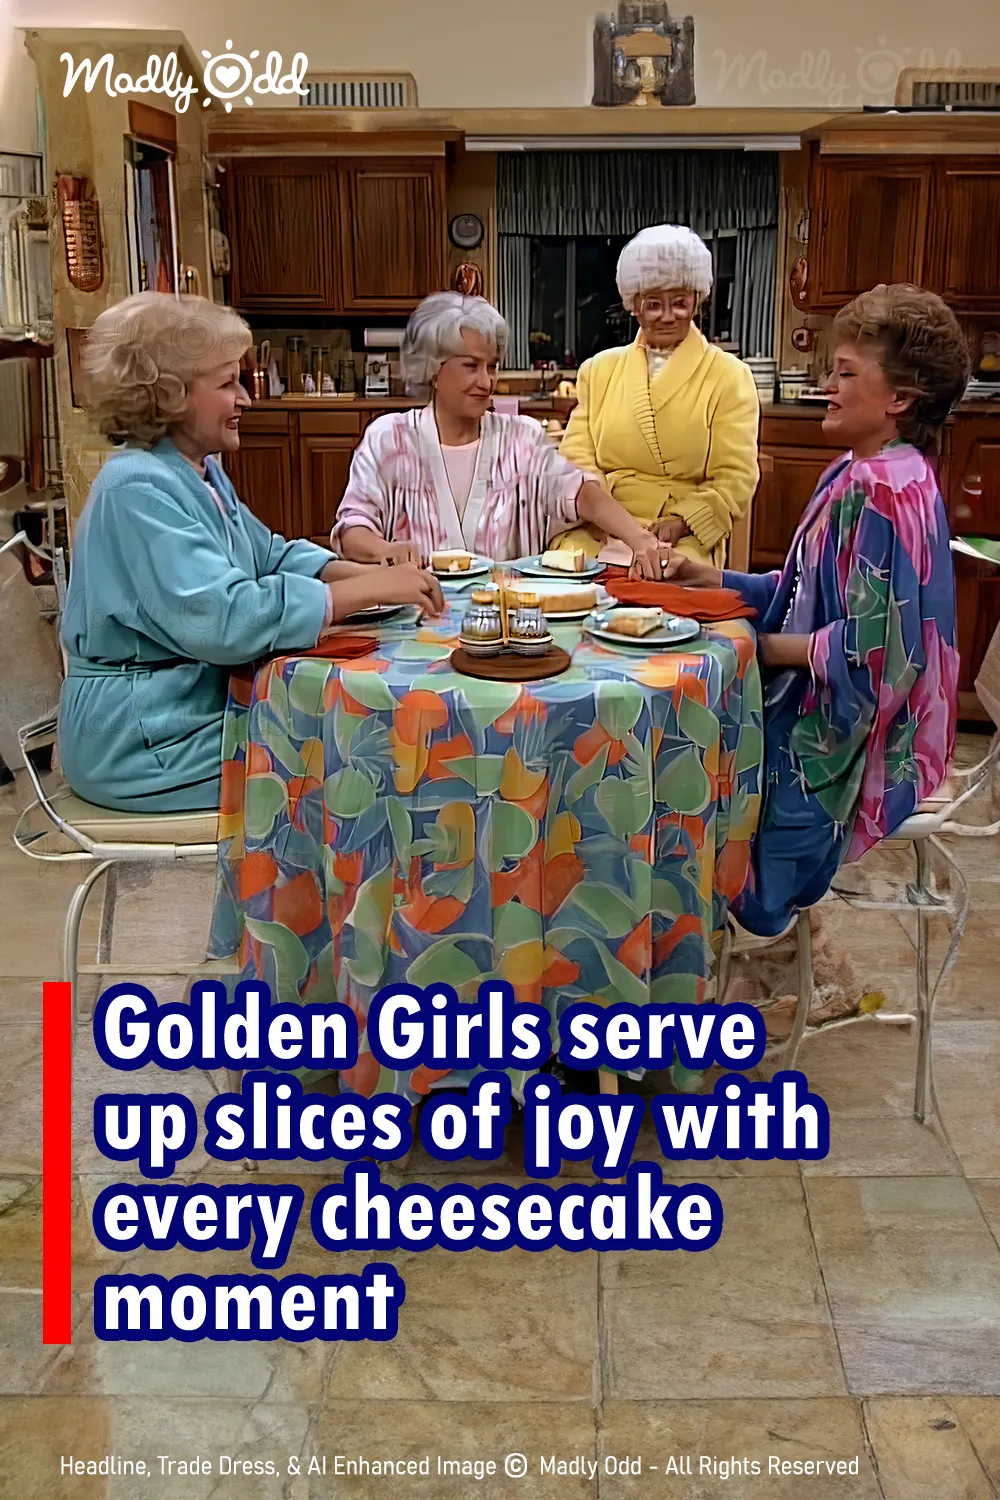 Golden Girls serve up slices of joy with every cheesecake moment